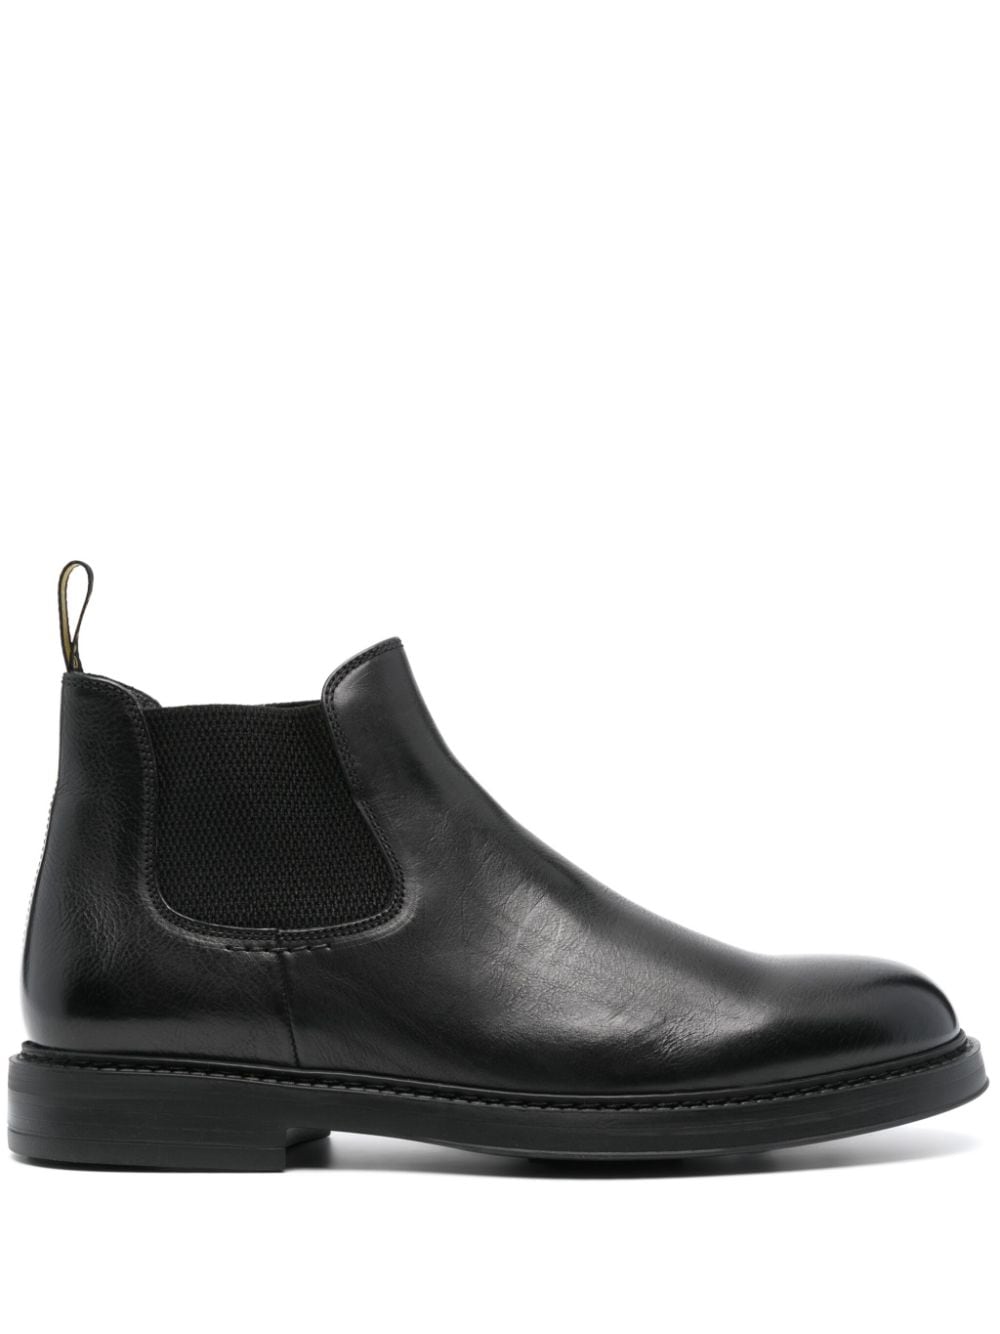 DOUCAL'S ROUND-TOE LEATHER BOOTS